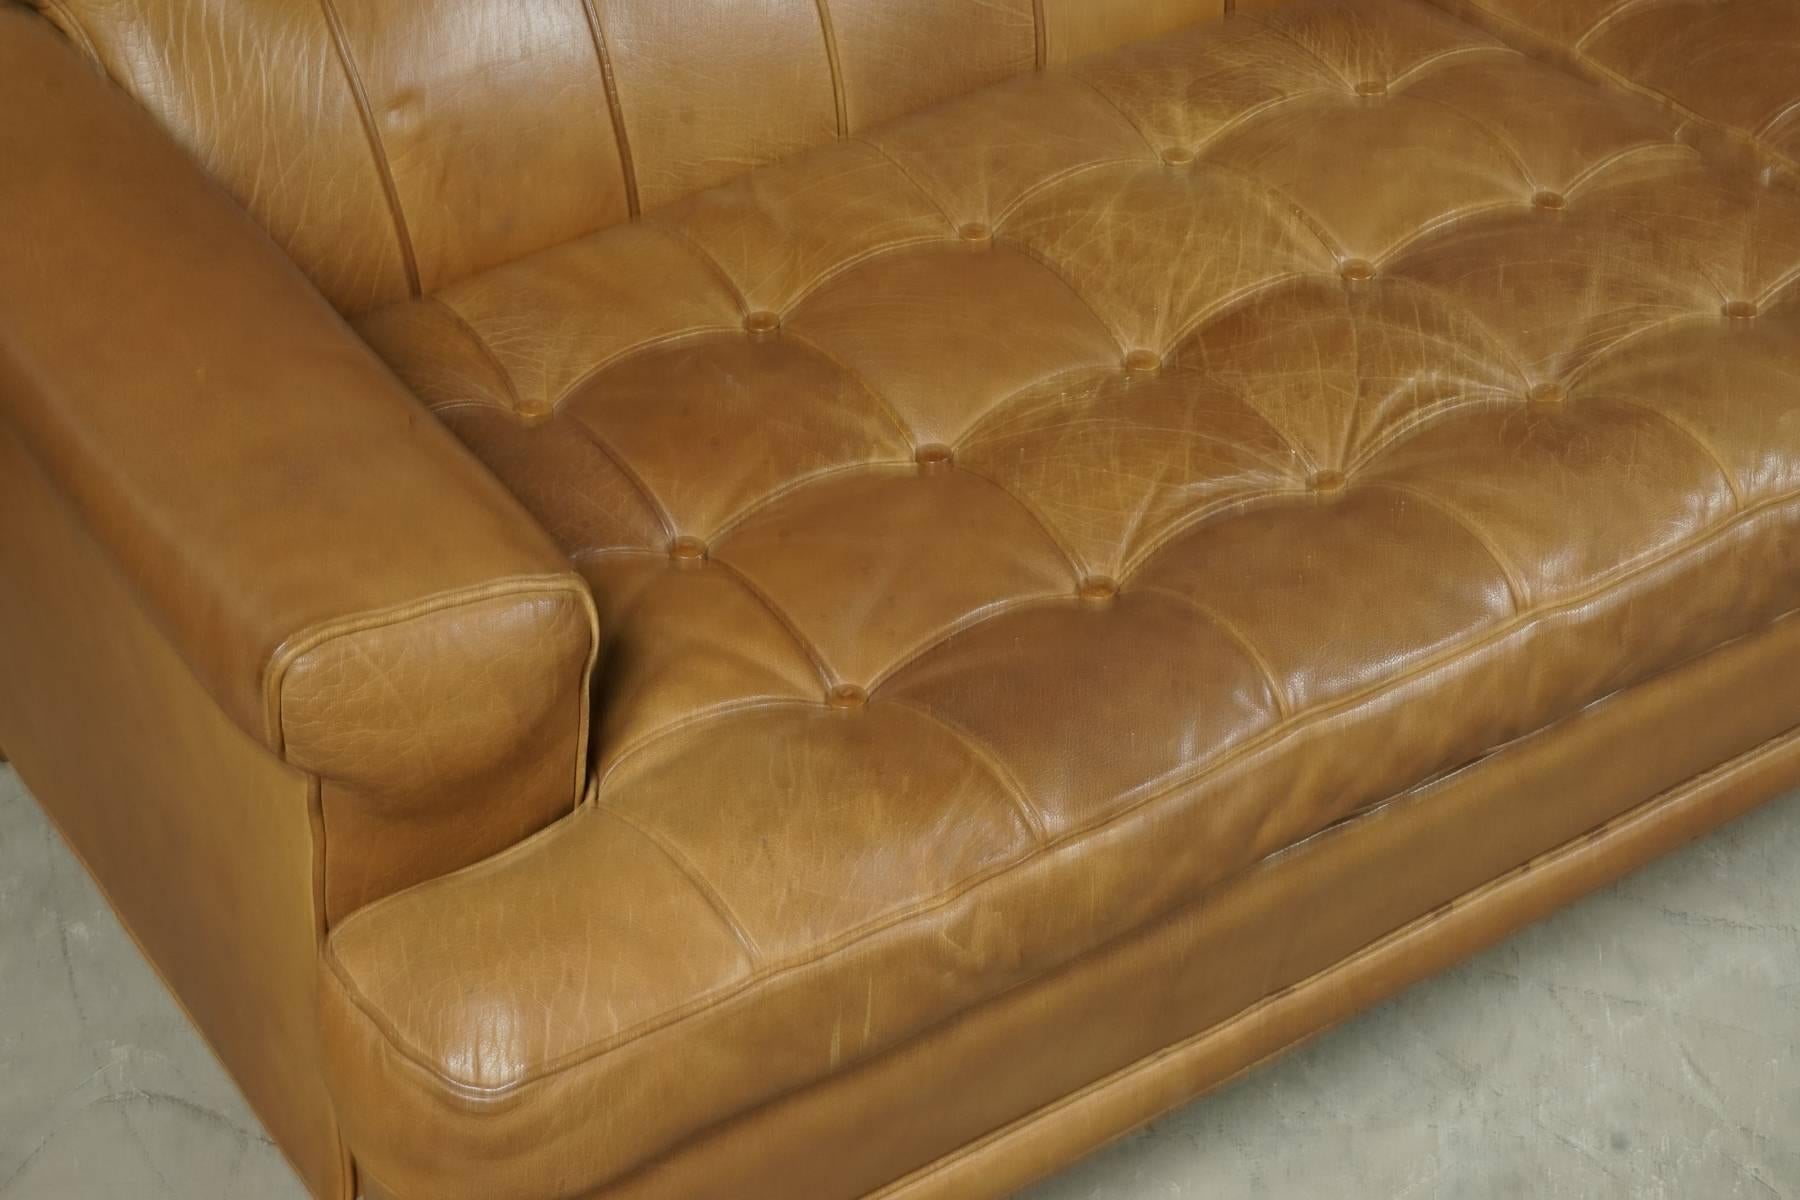 Arne Norell sofa model "Merkur" by Arne Norell AB, Sweden. Superb patina and quality. Buttoned cognac leather covers.